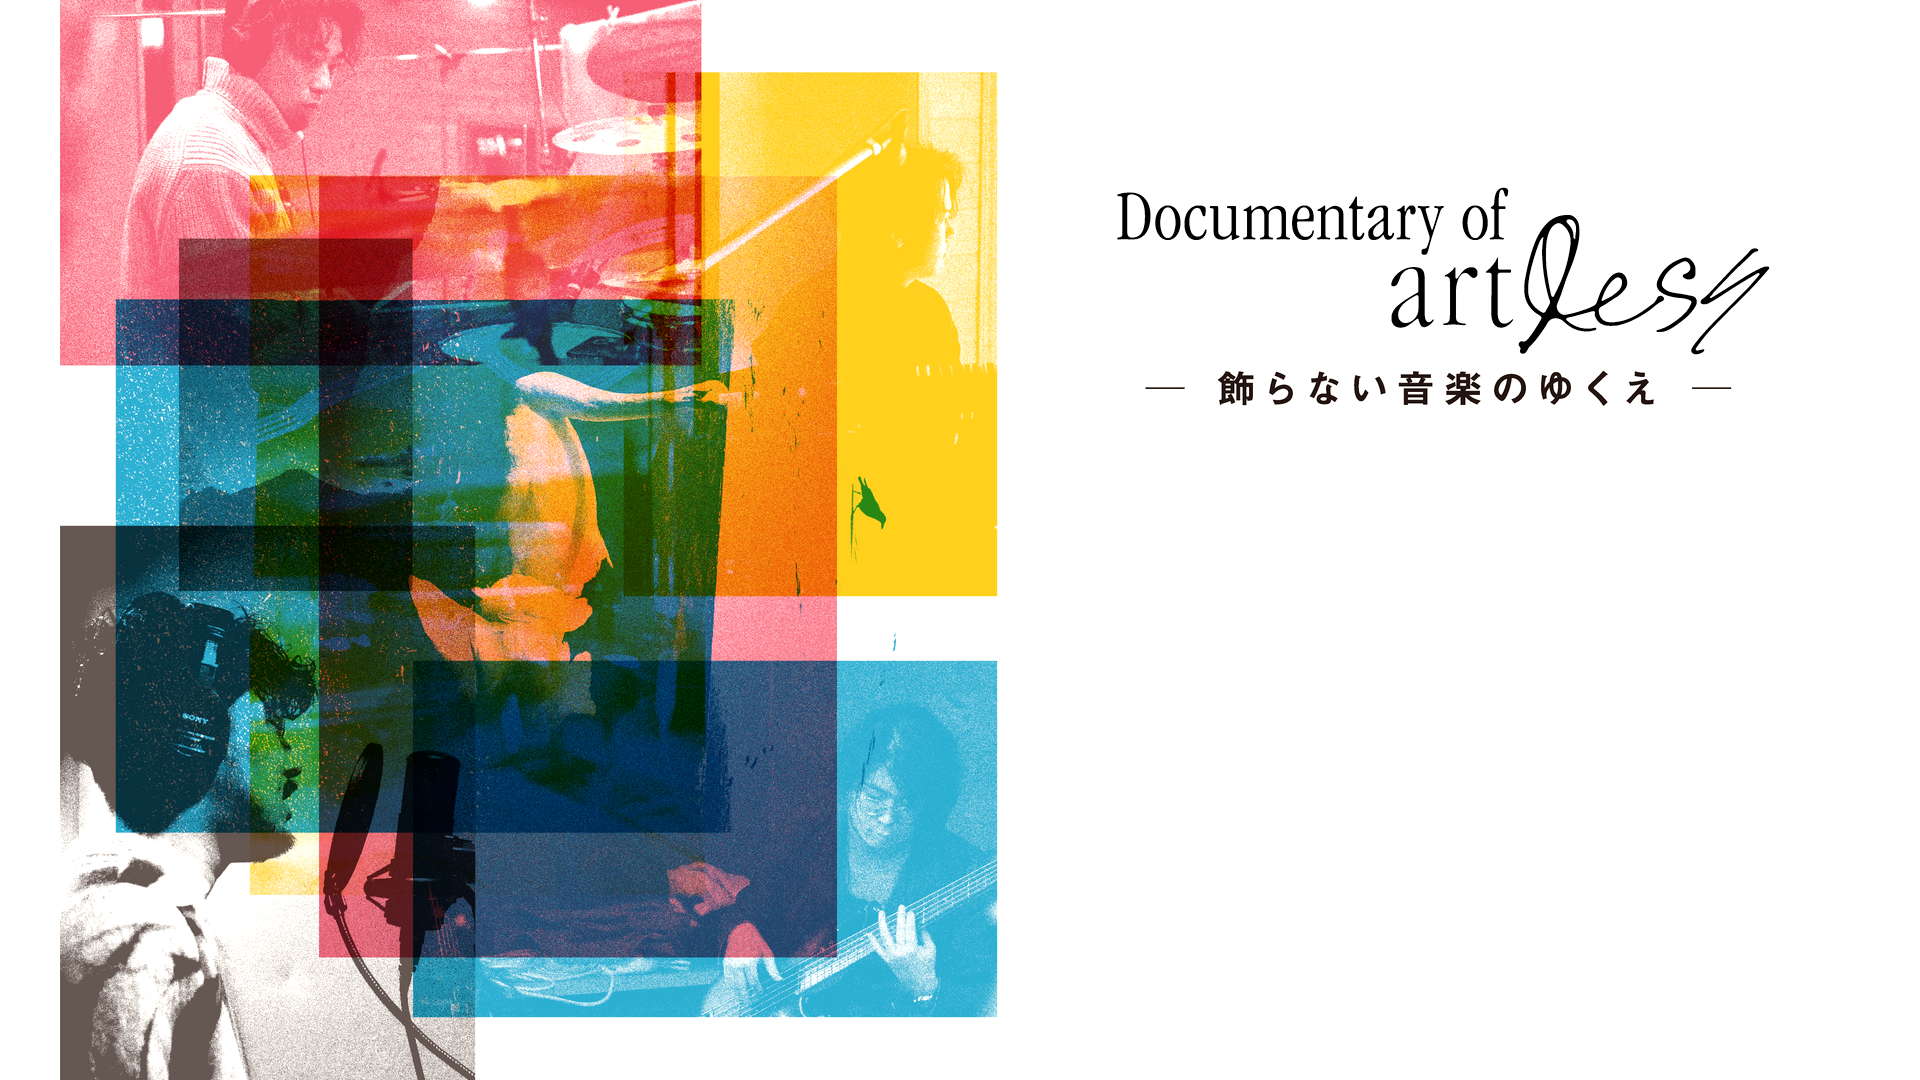 Documentary of artless—飾らない音楽のゆくえ—